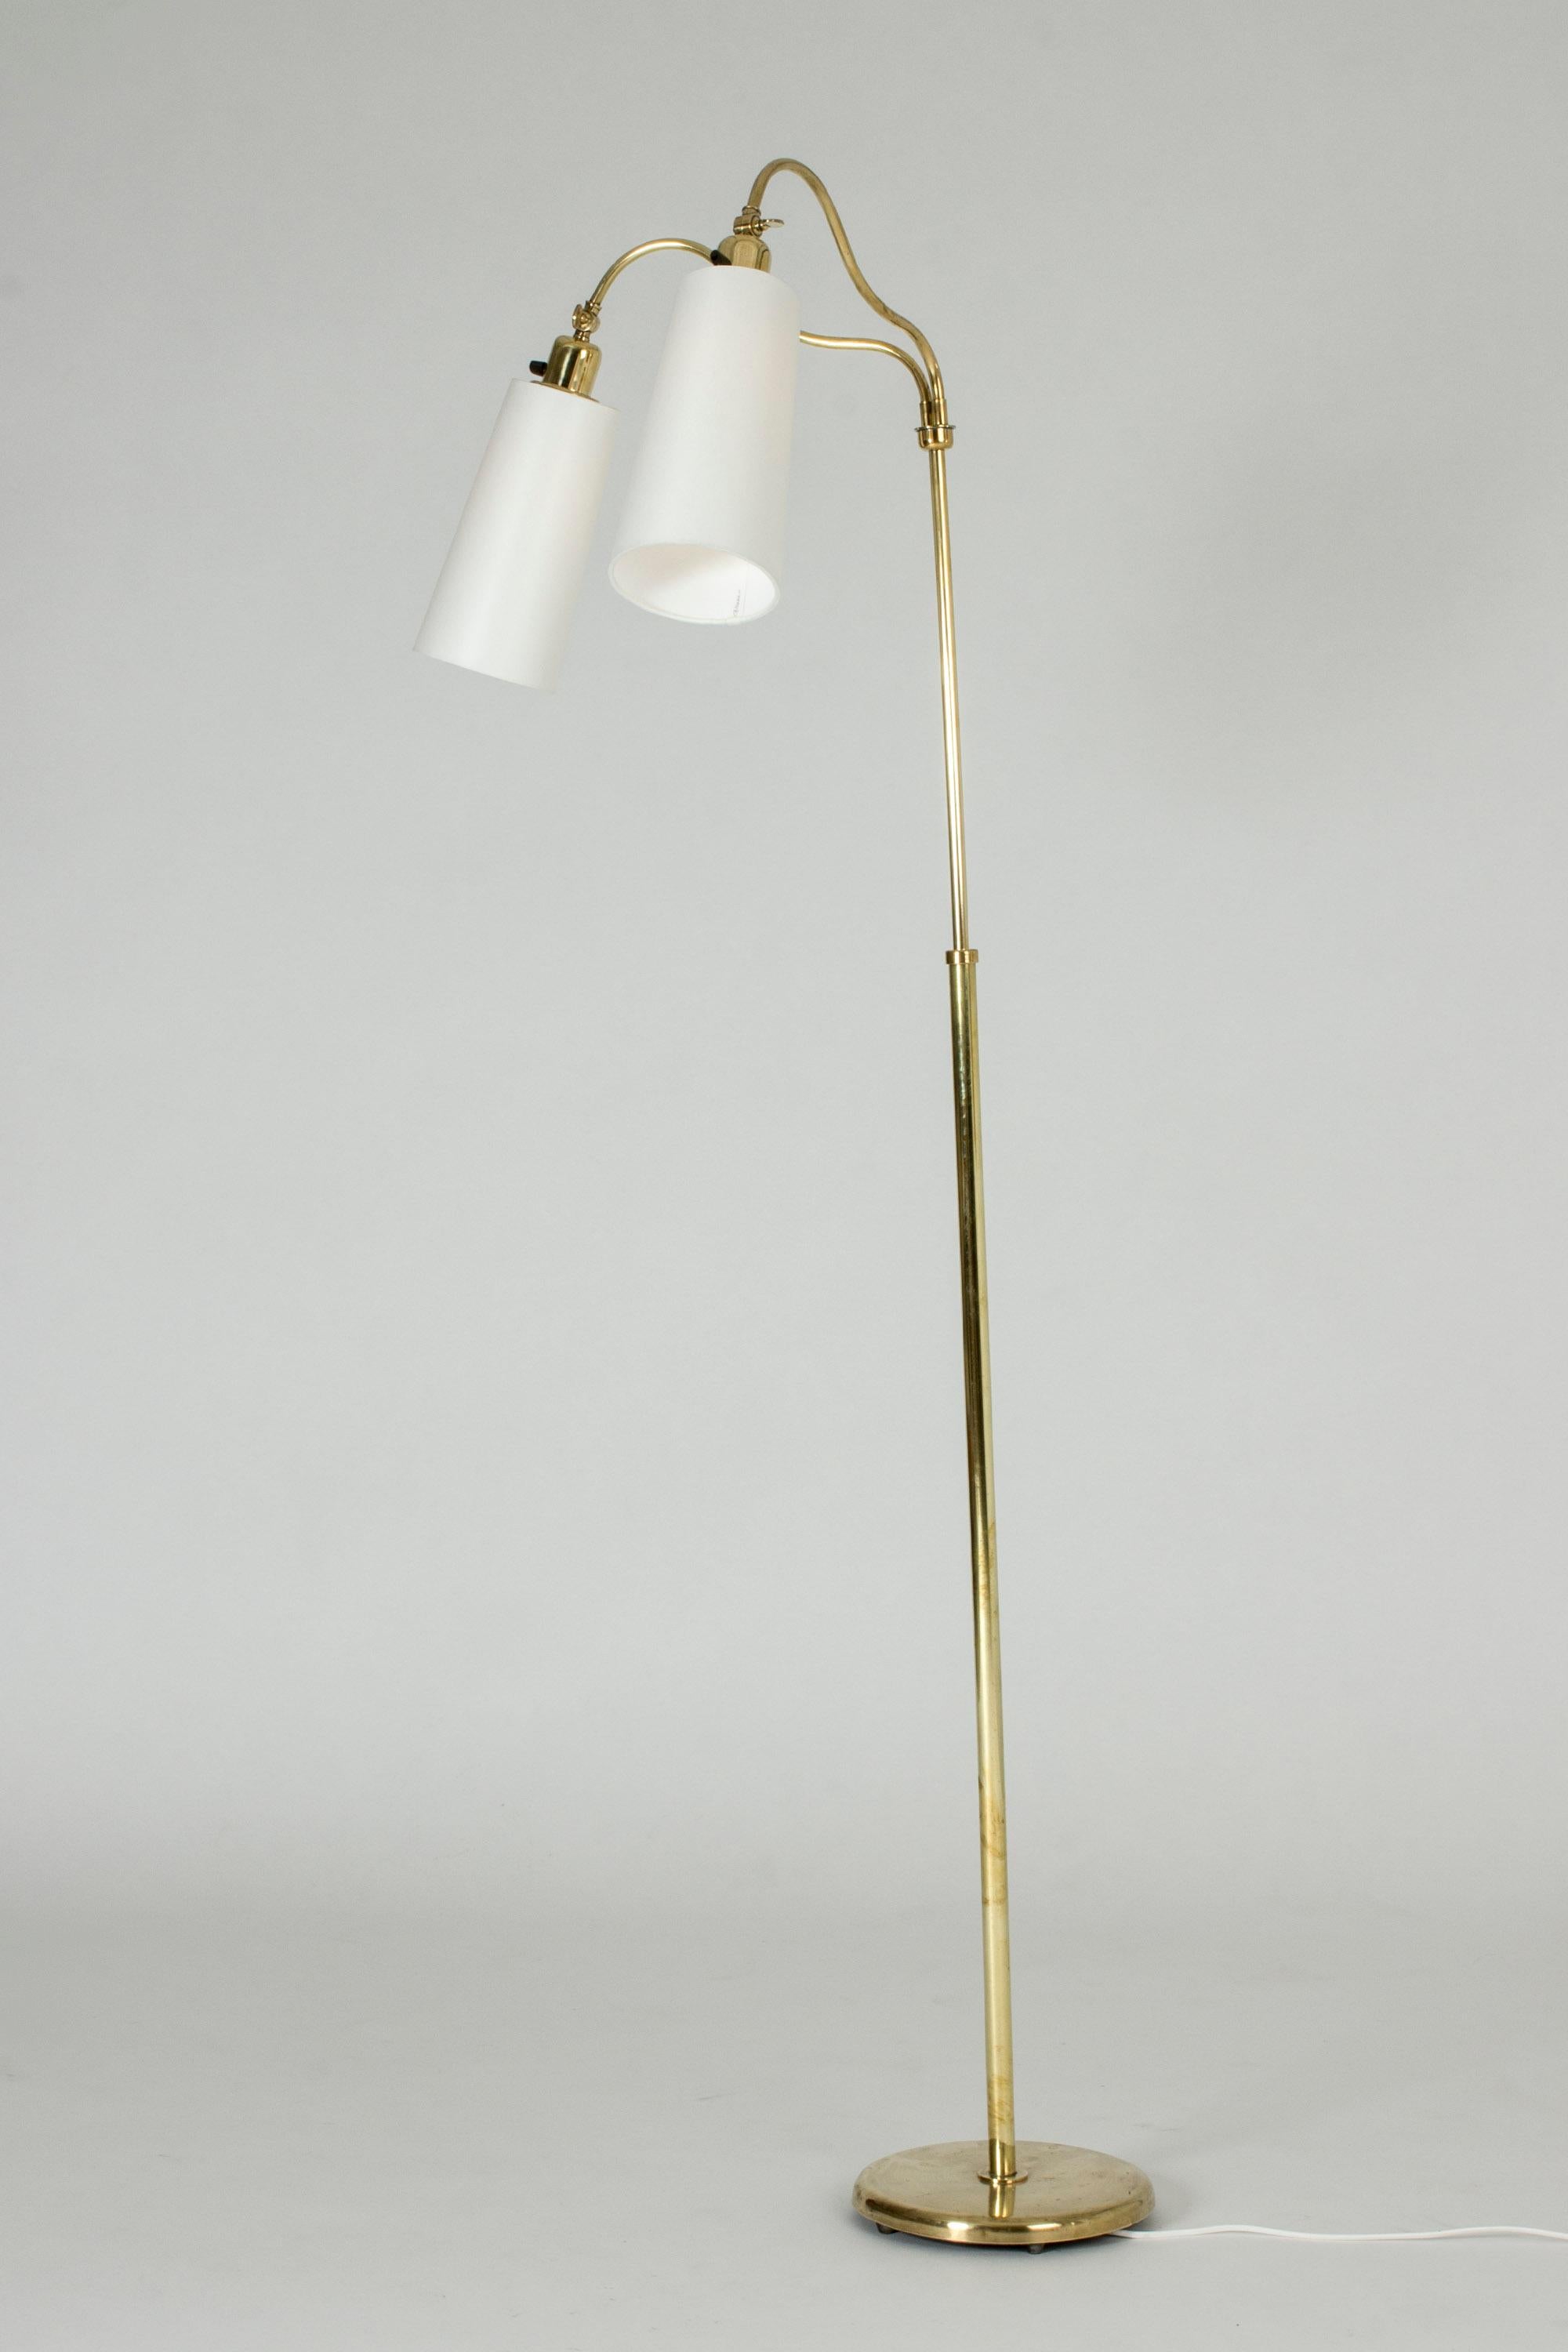 Swedish Modern Brass Floor Lamp In Good Condition For Sale In Stockholm, SE